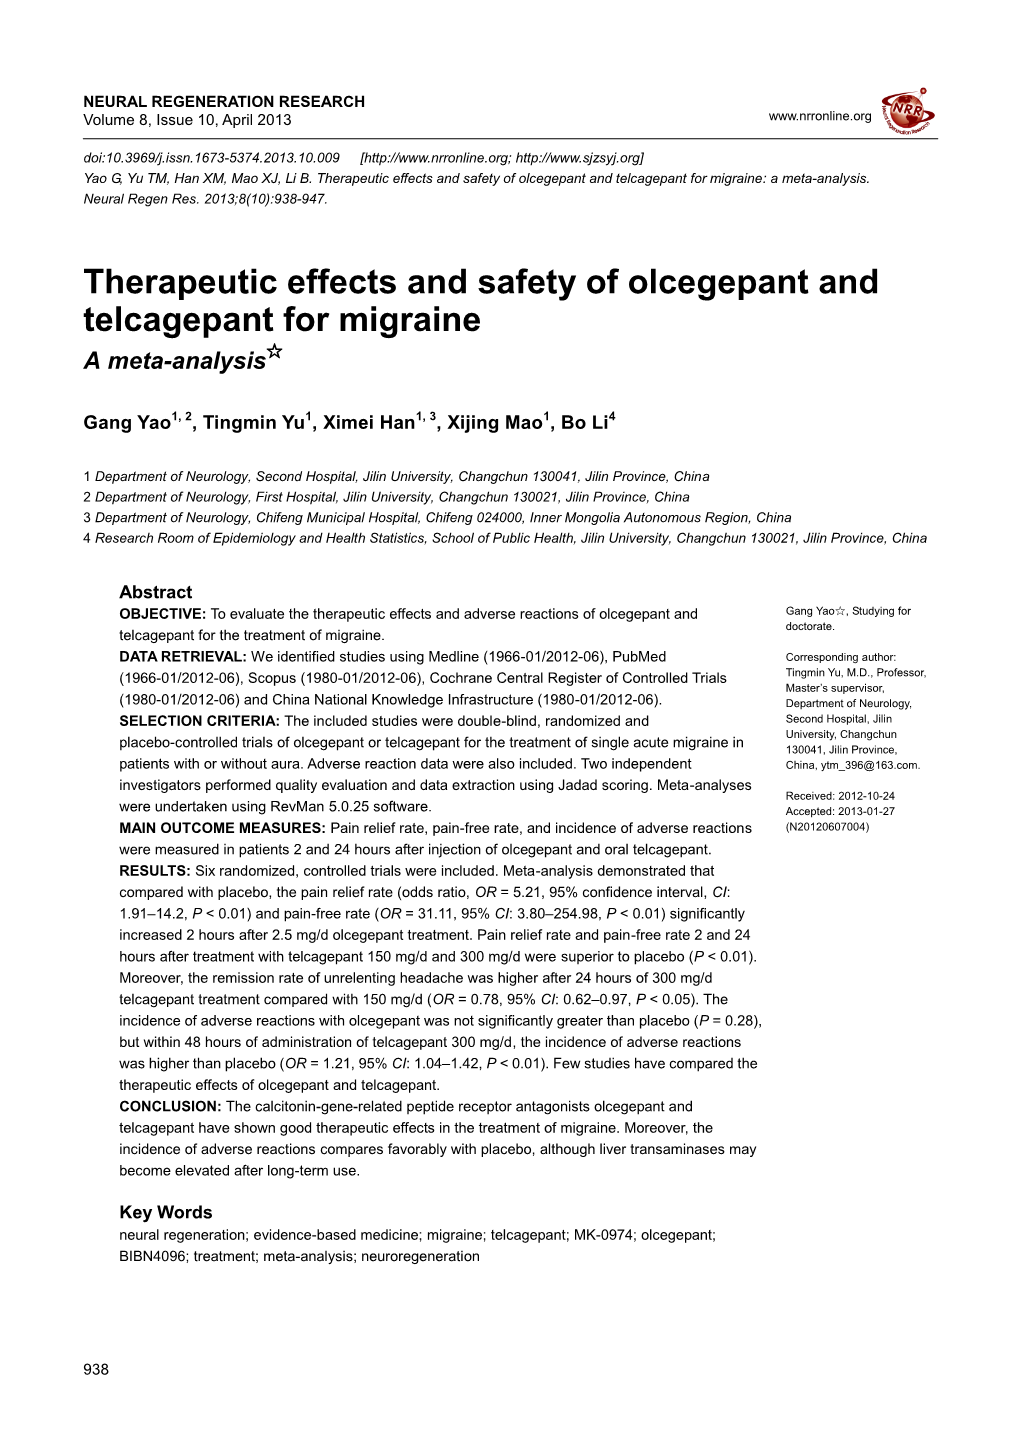 Therapeutic Effects and Safety of Olcegepant and Telcagepant for Migraine: a Meta-Analysis